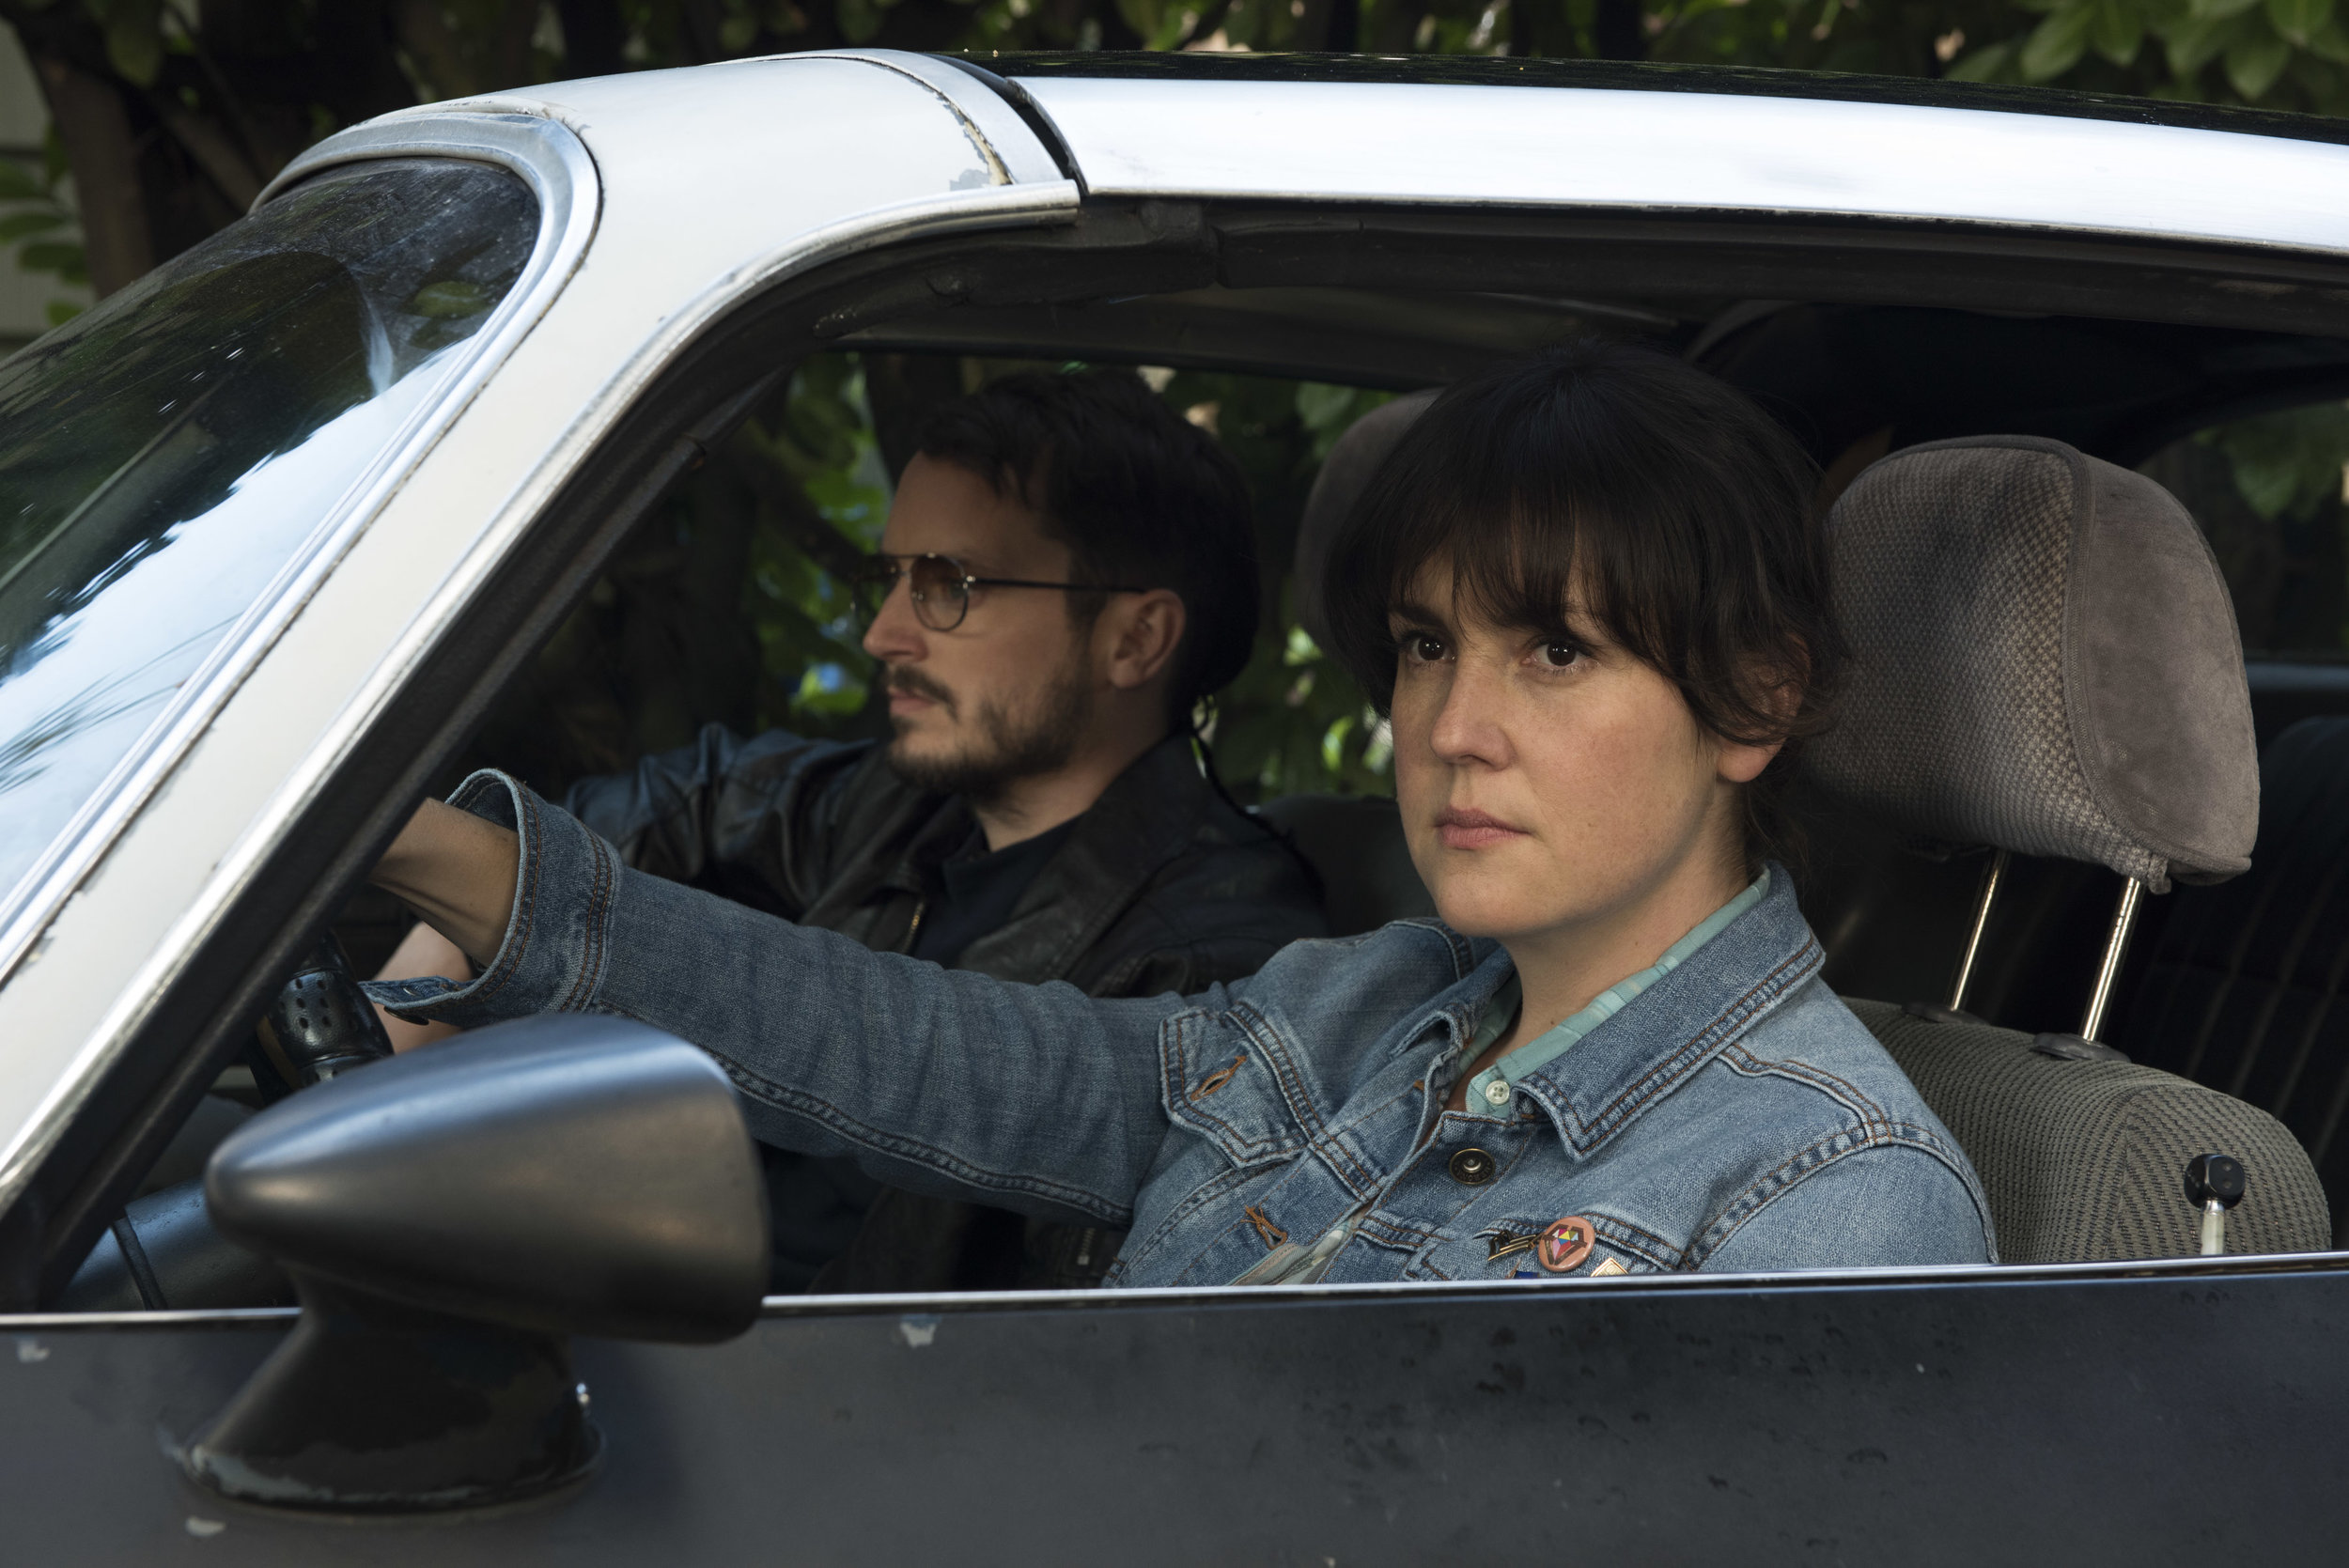  Melanie Lynskey and Elijah Wood in  I Don’t Feel At Home In This World Anymore,  Netflix 